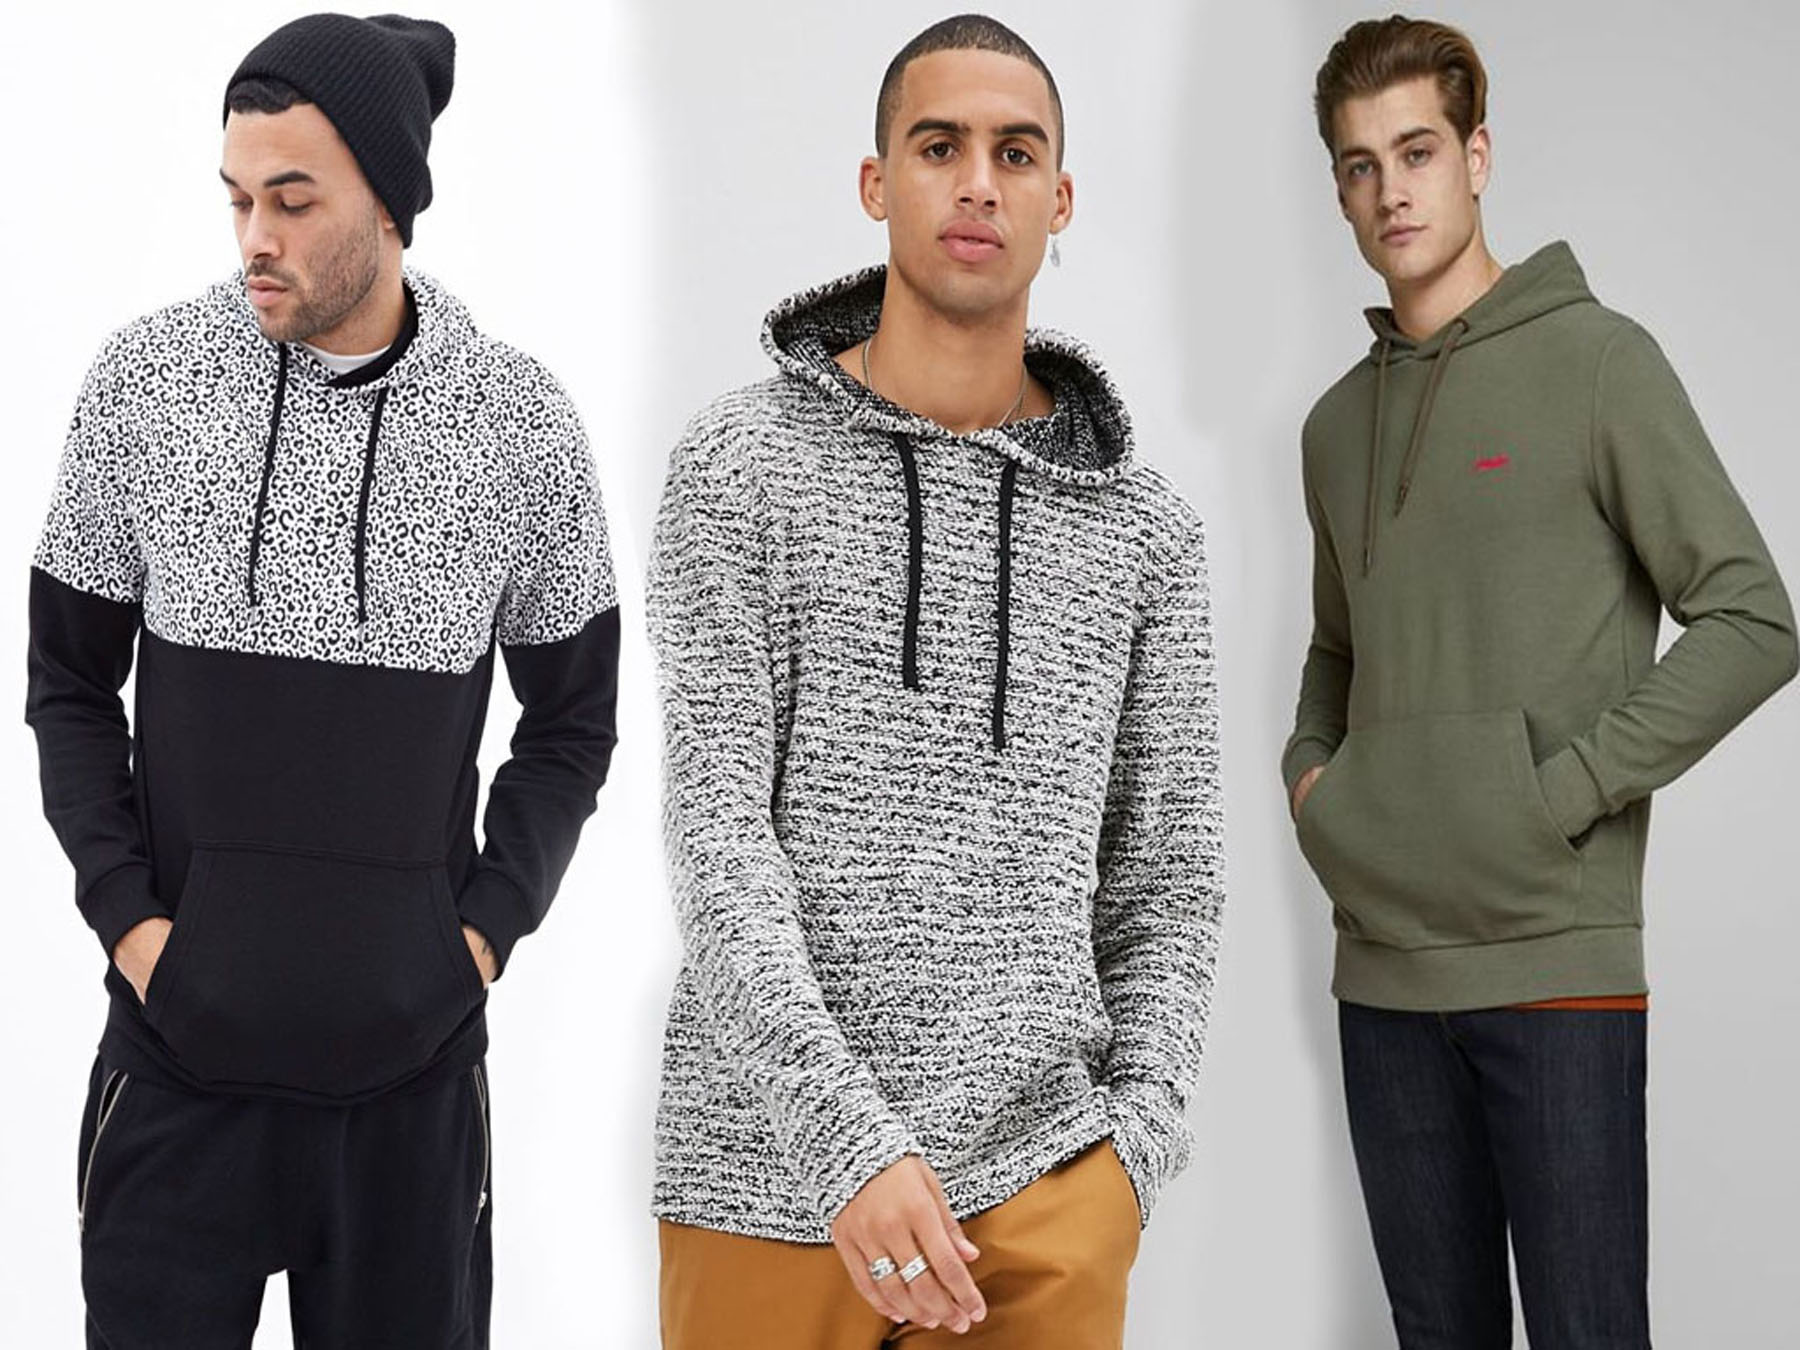 Sweatshirts For Males - The Hottest Style